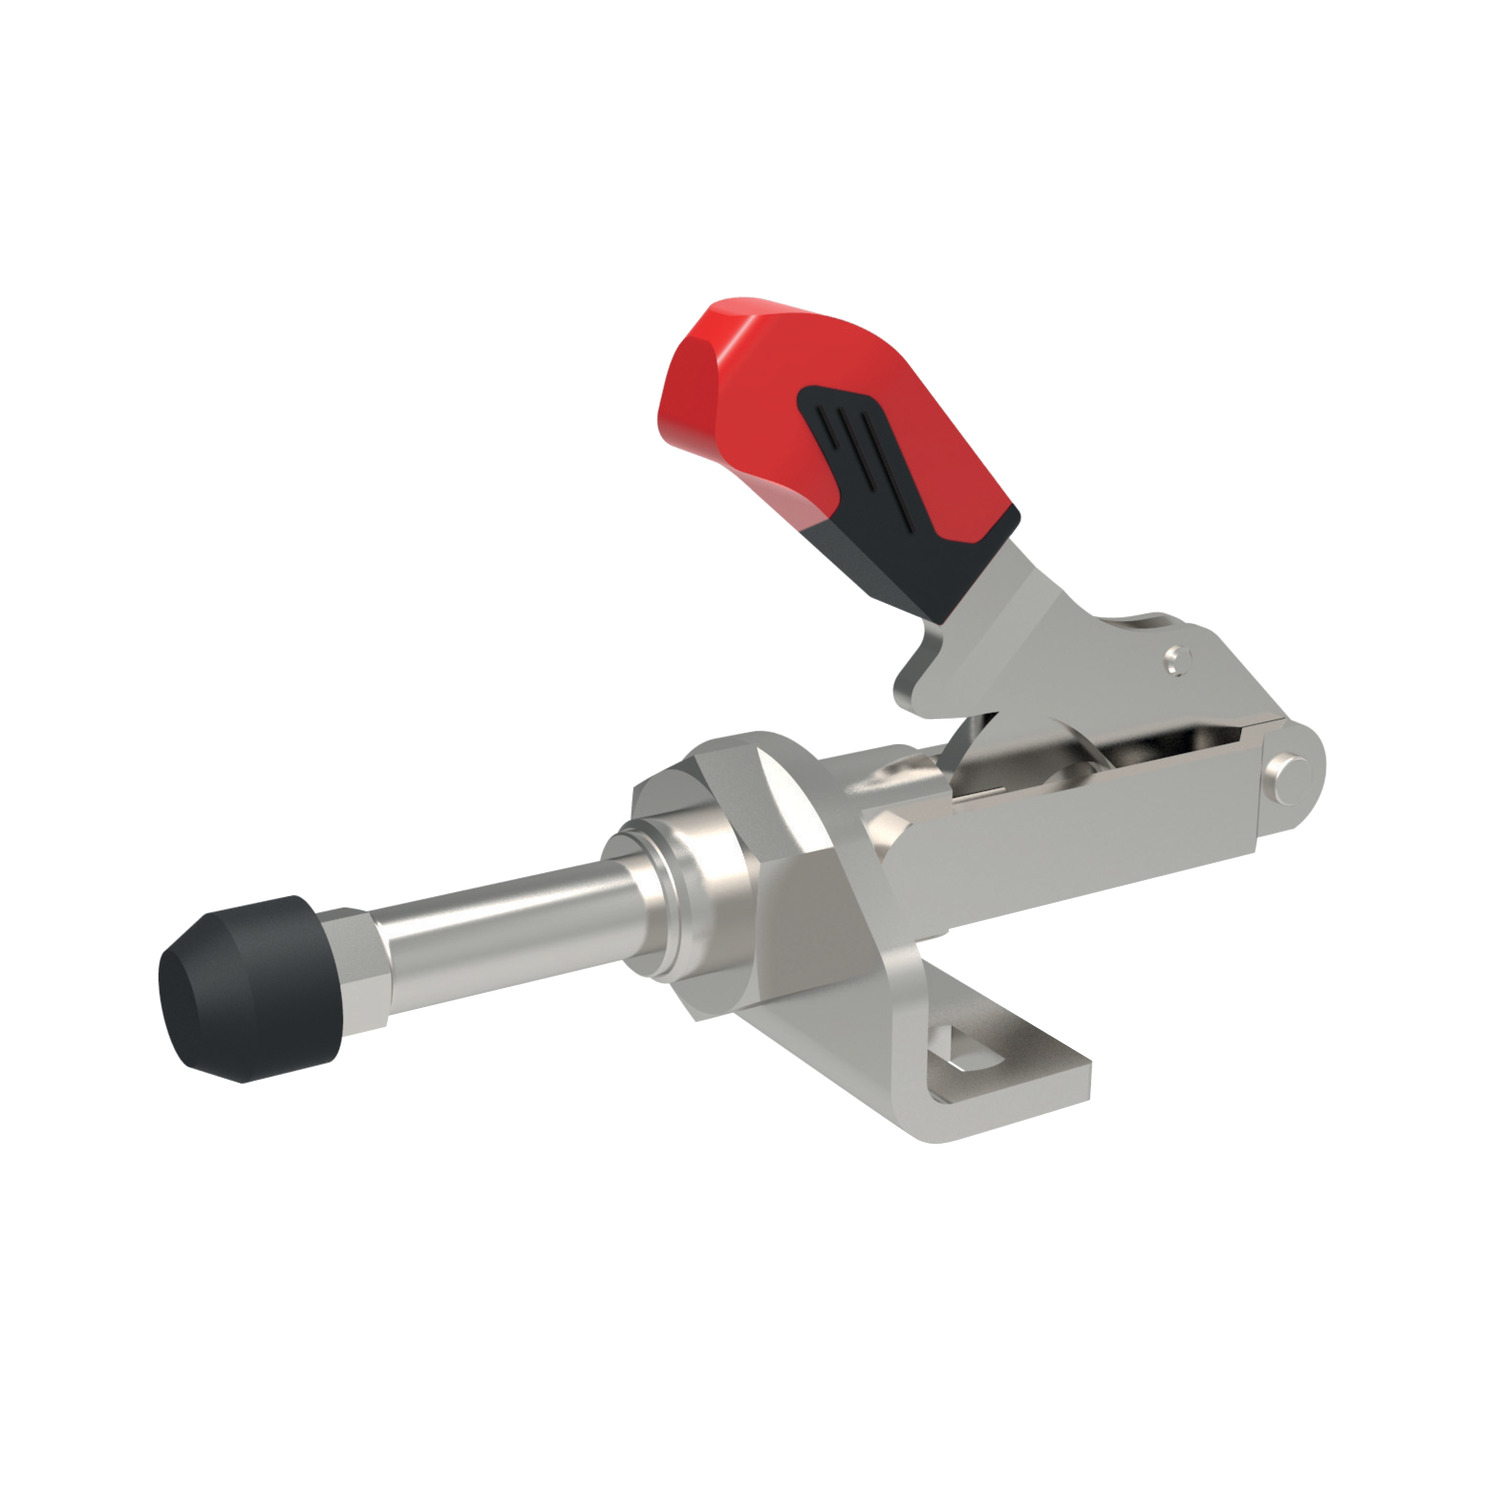 Push-Pull Toggle Clamps Stainless steel versions of our extended push rod push pull toggle clamps. Better suited for the adjustment of larger work pieces. Comes with clamping screw and rubber nose.